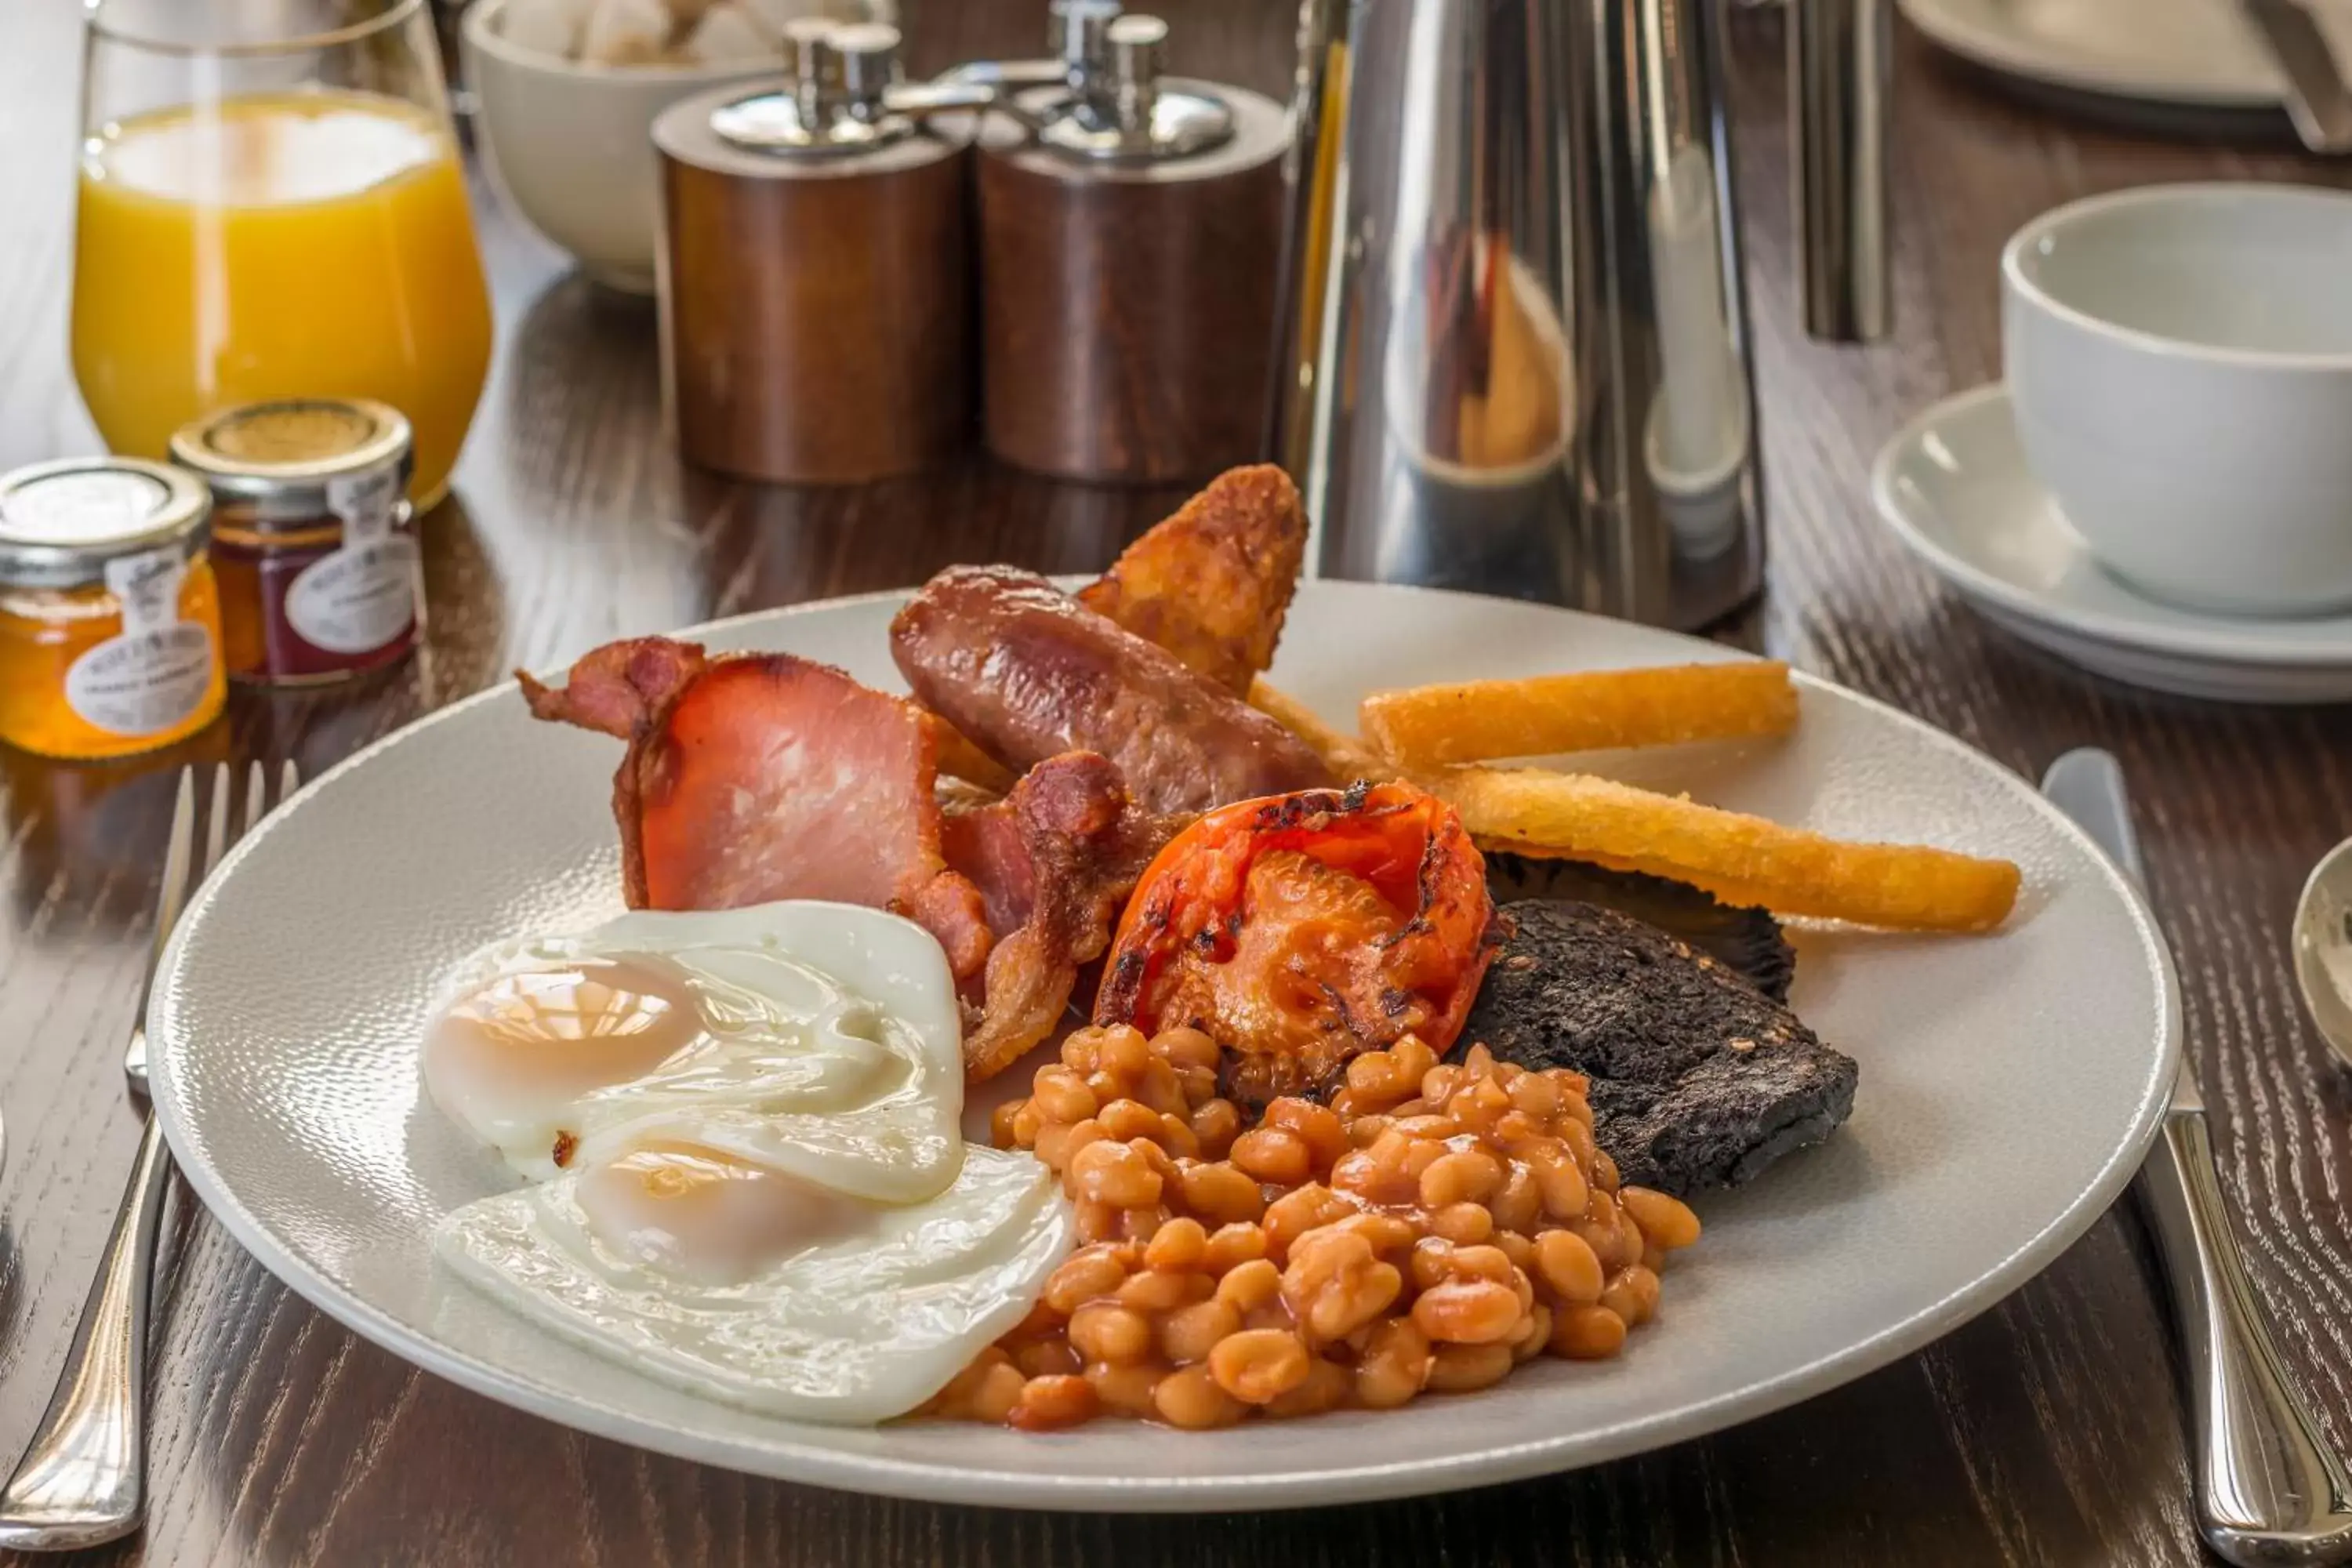 English/Irish breakfast in The Admiral Rodney Hotel, Horncastle, Lincolnshire